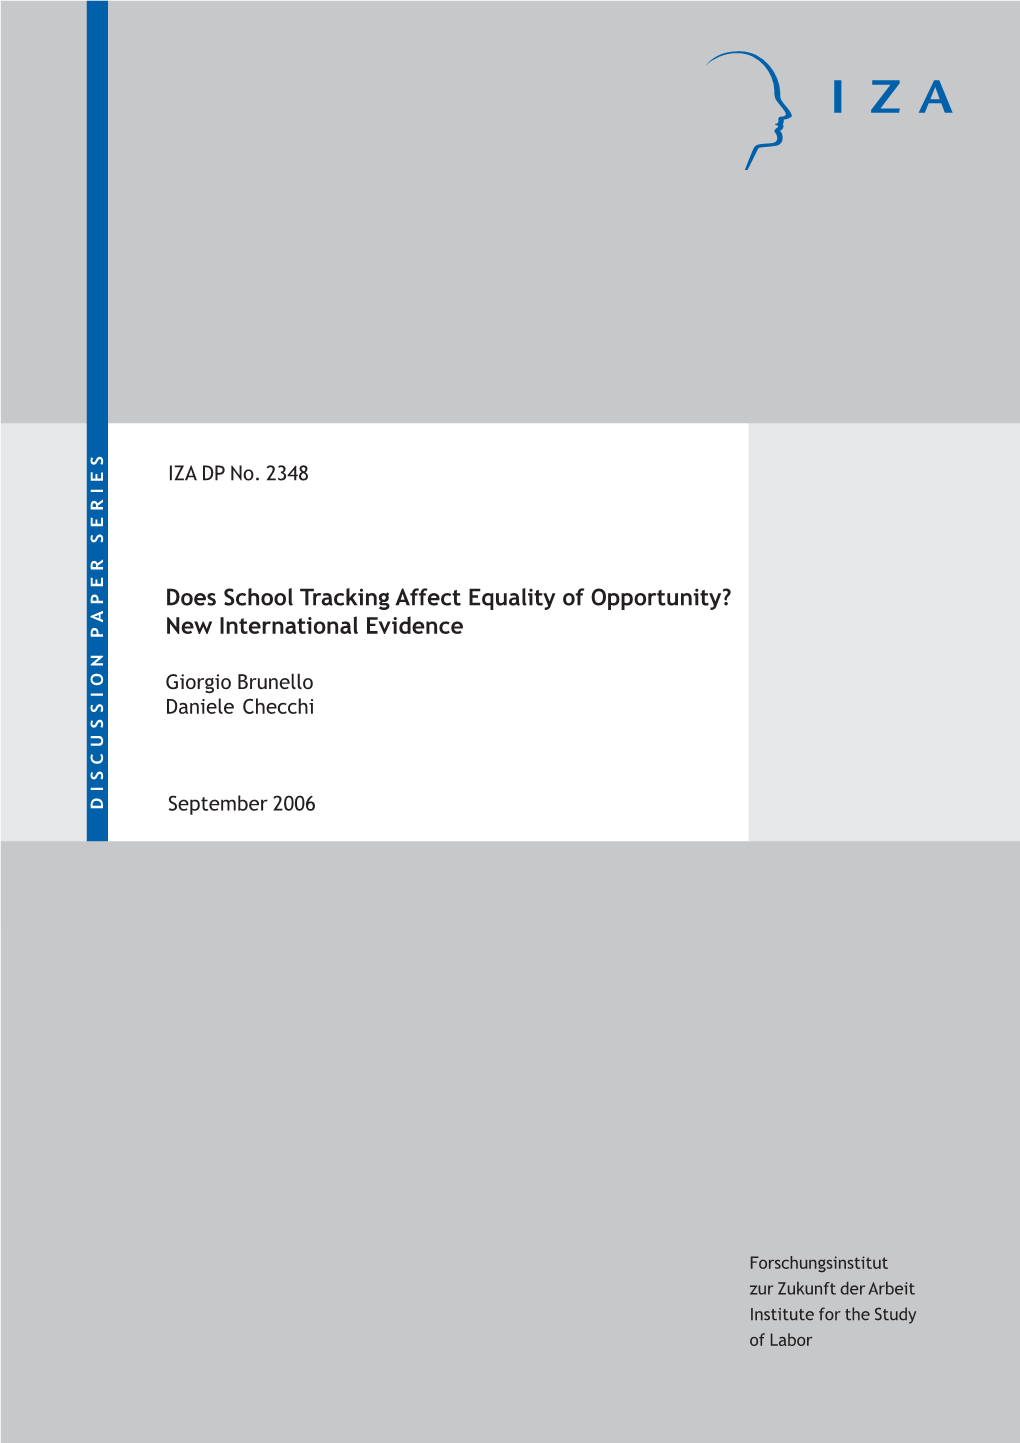 Does School Tracking Affect Equality of Opportunity? New International Evidence